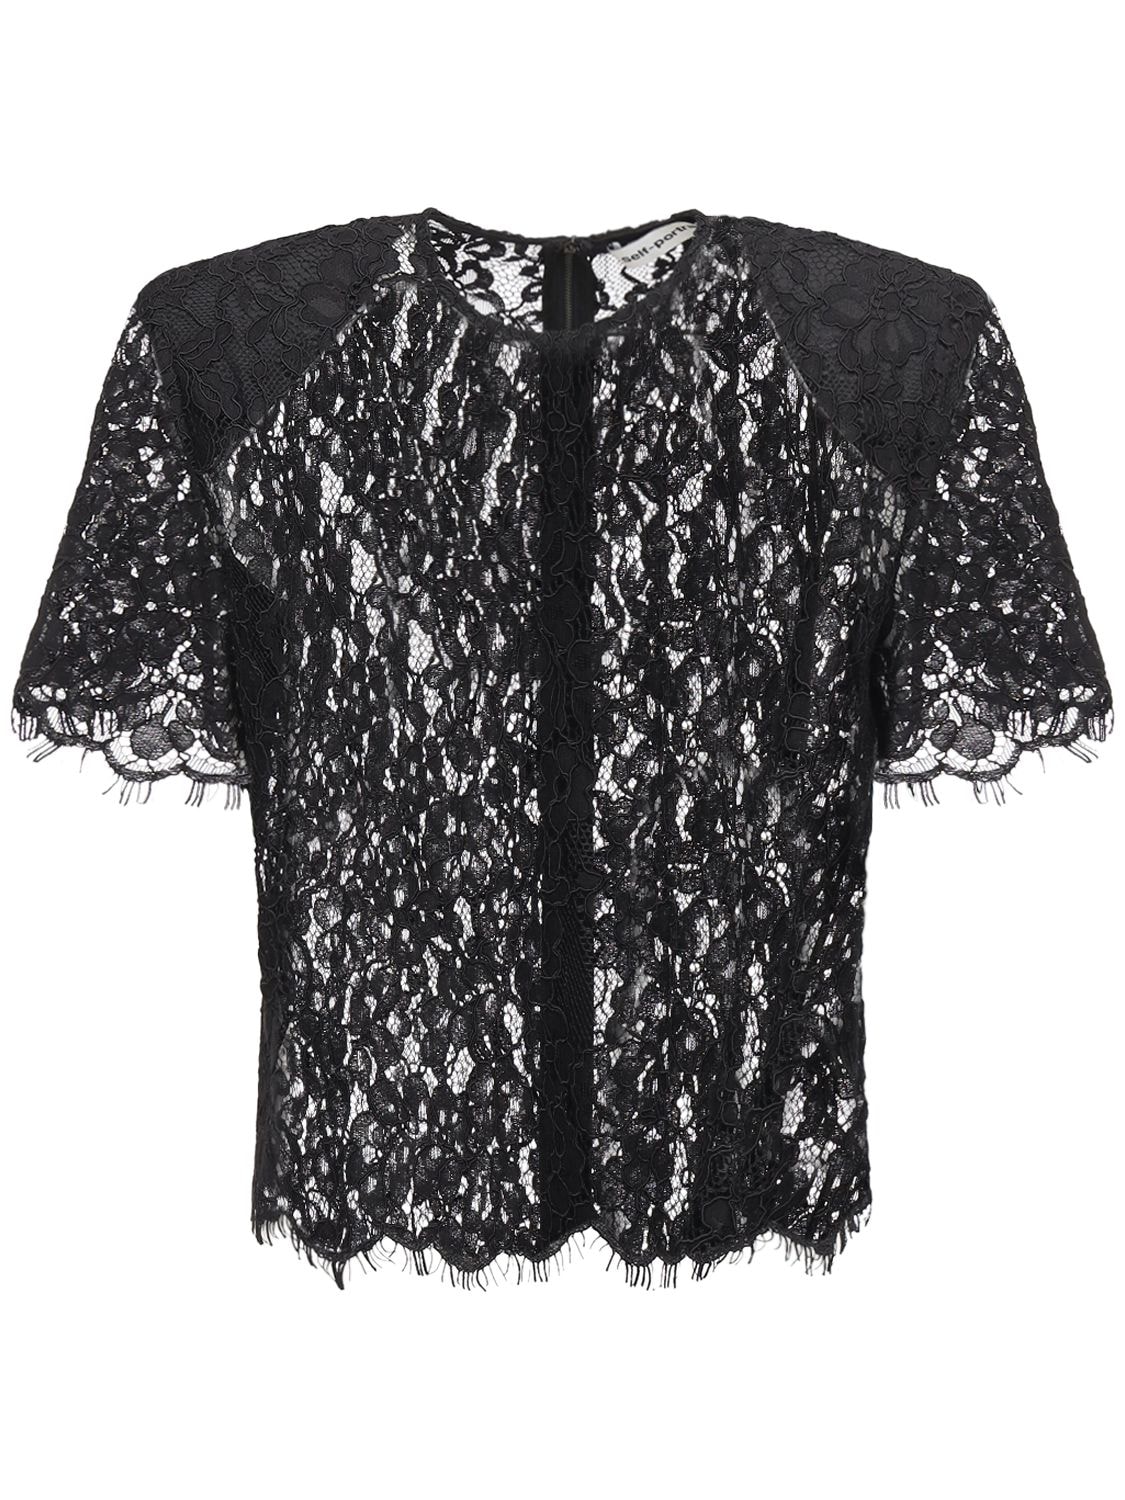 Sheer Cord Lace Top